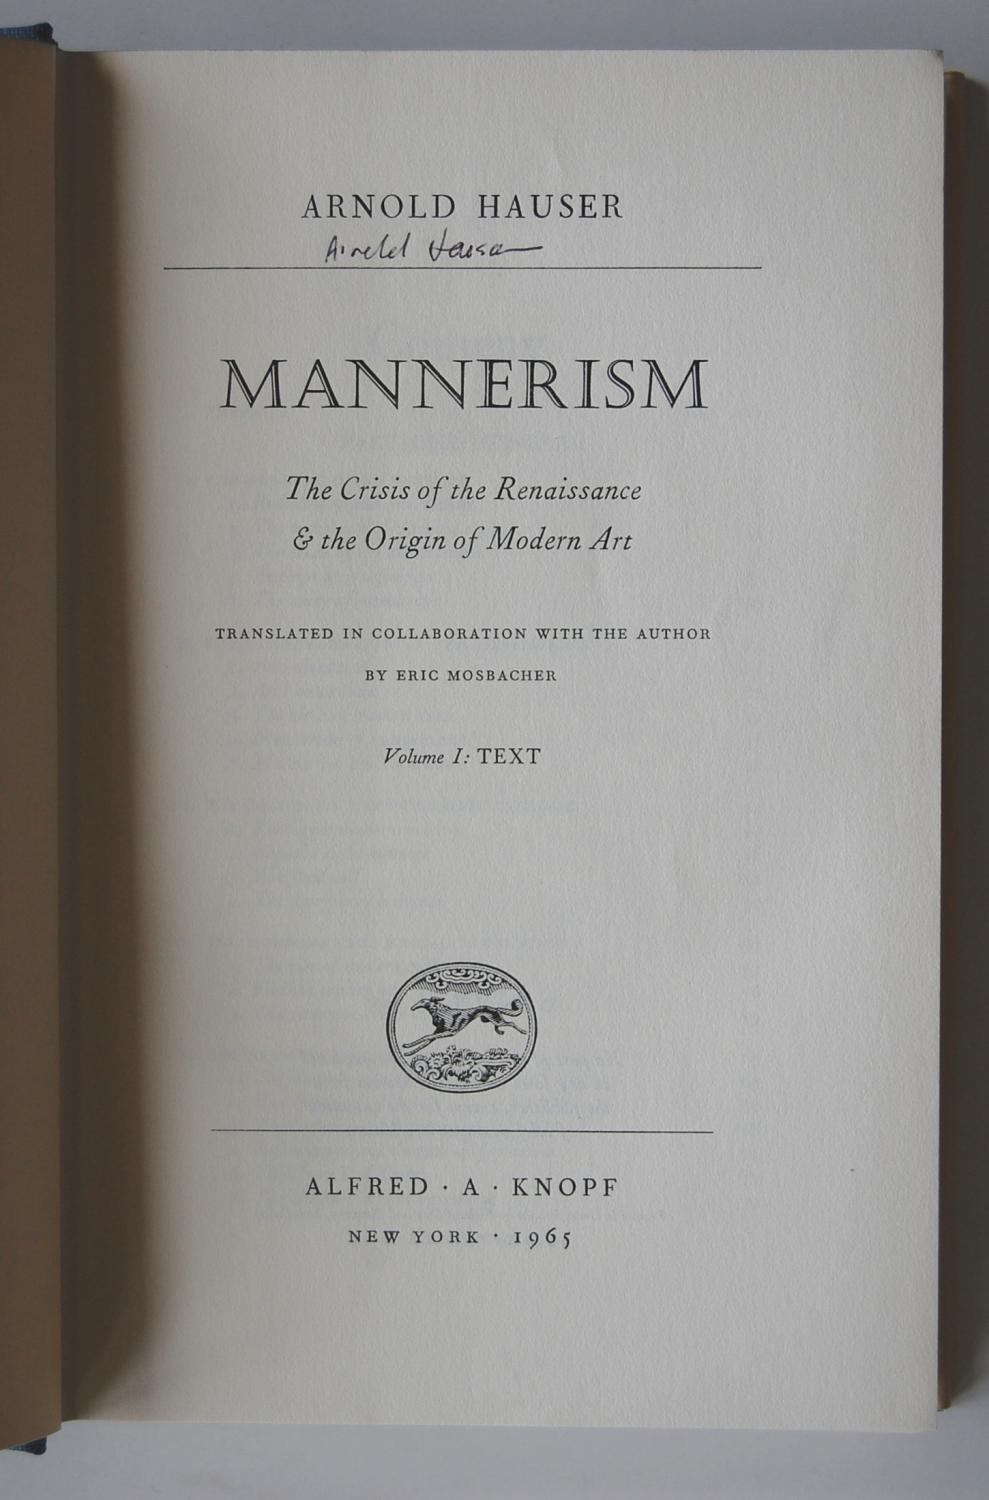 Mannerism The Crisis of the Renaissance and the Origin of Modern Art